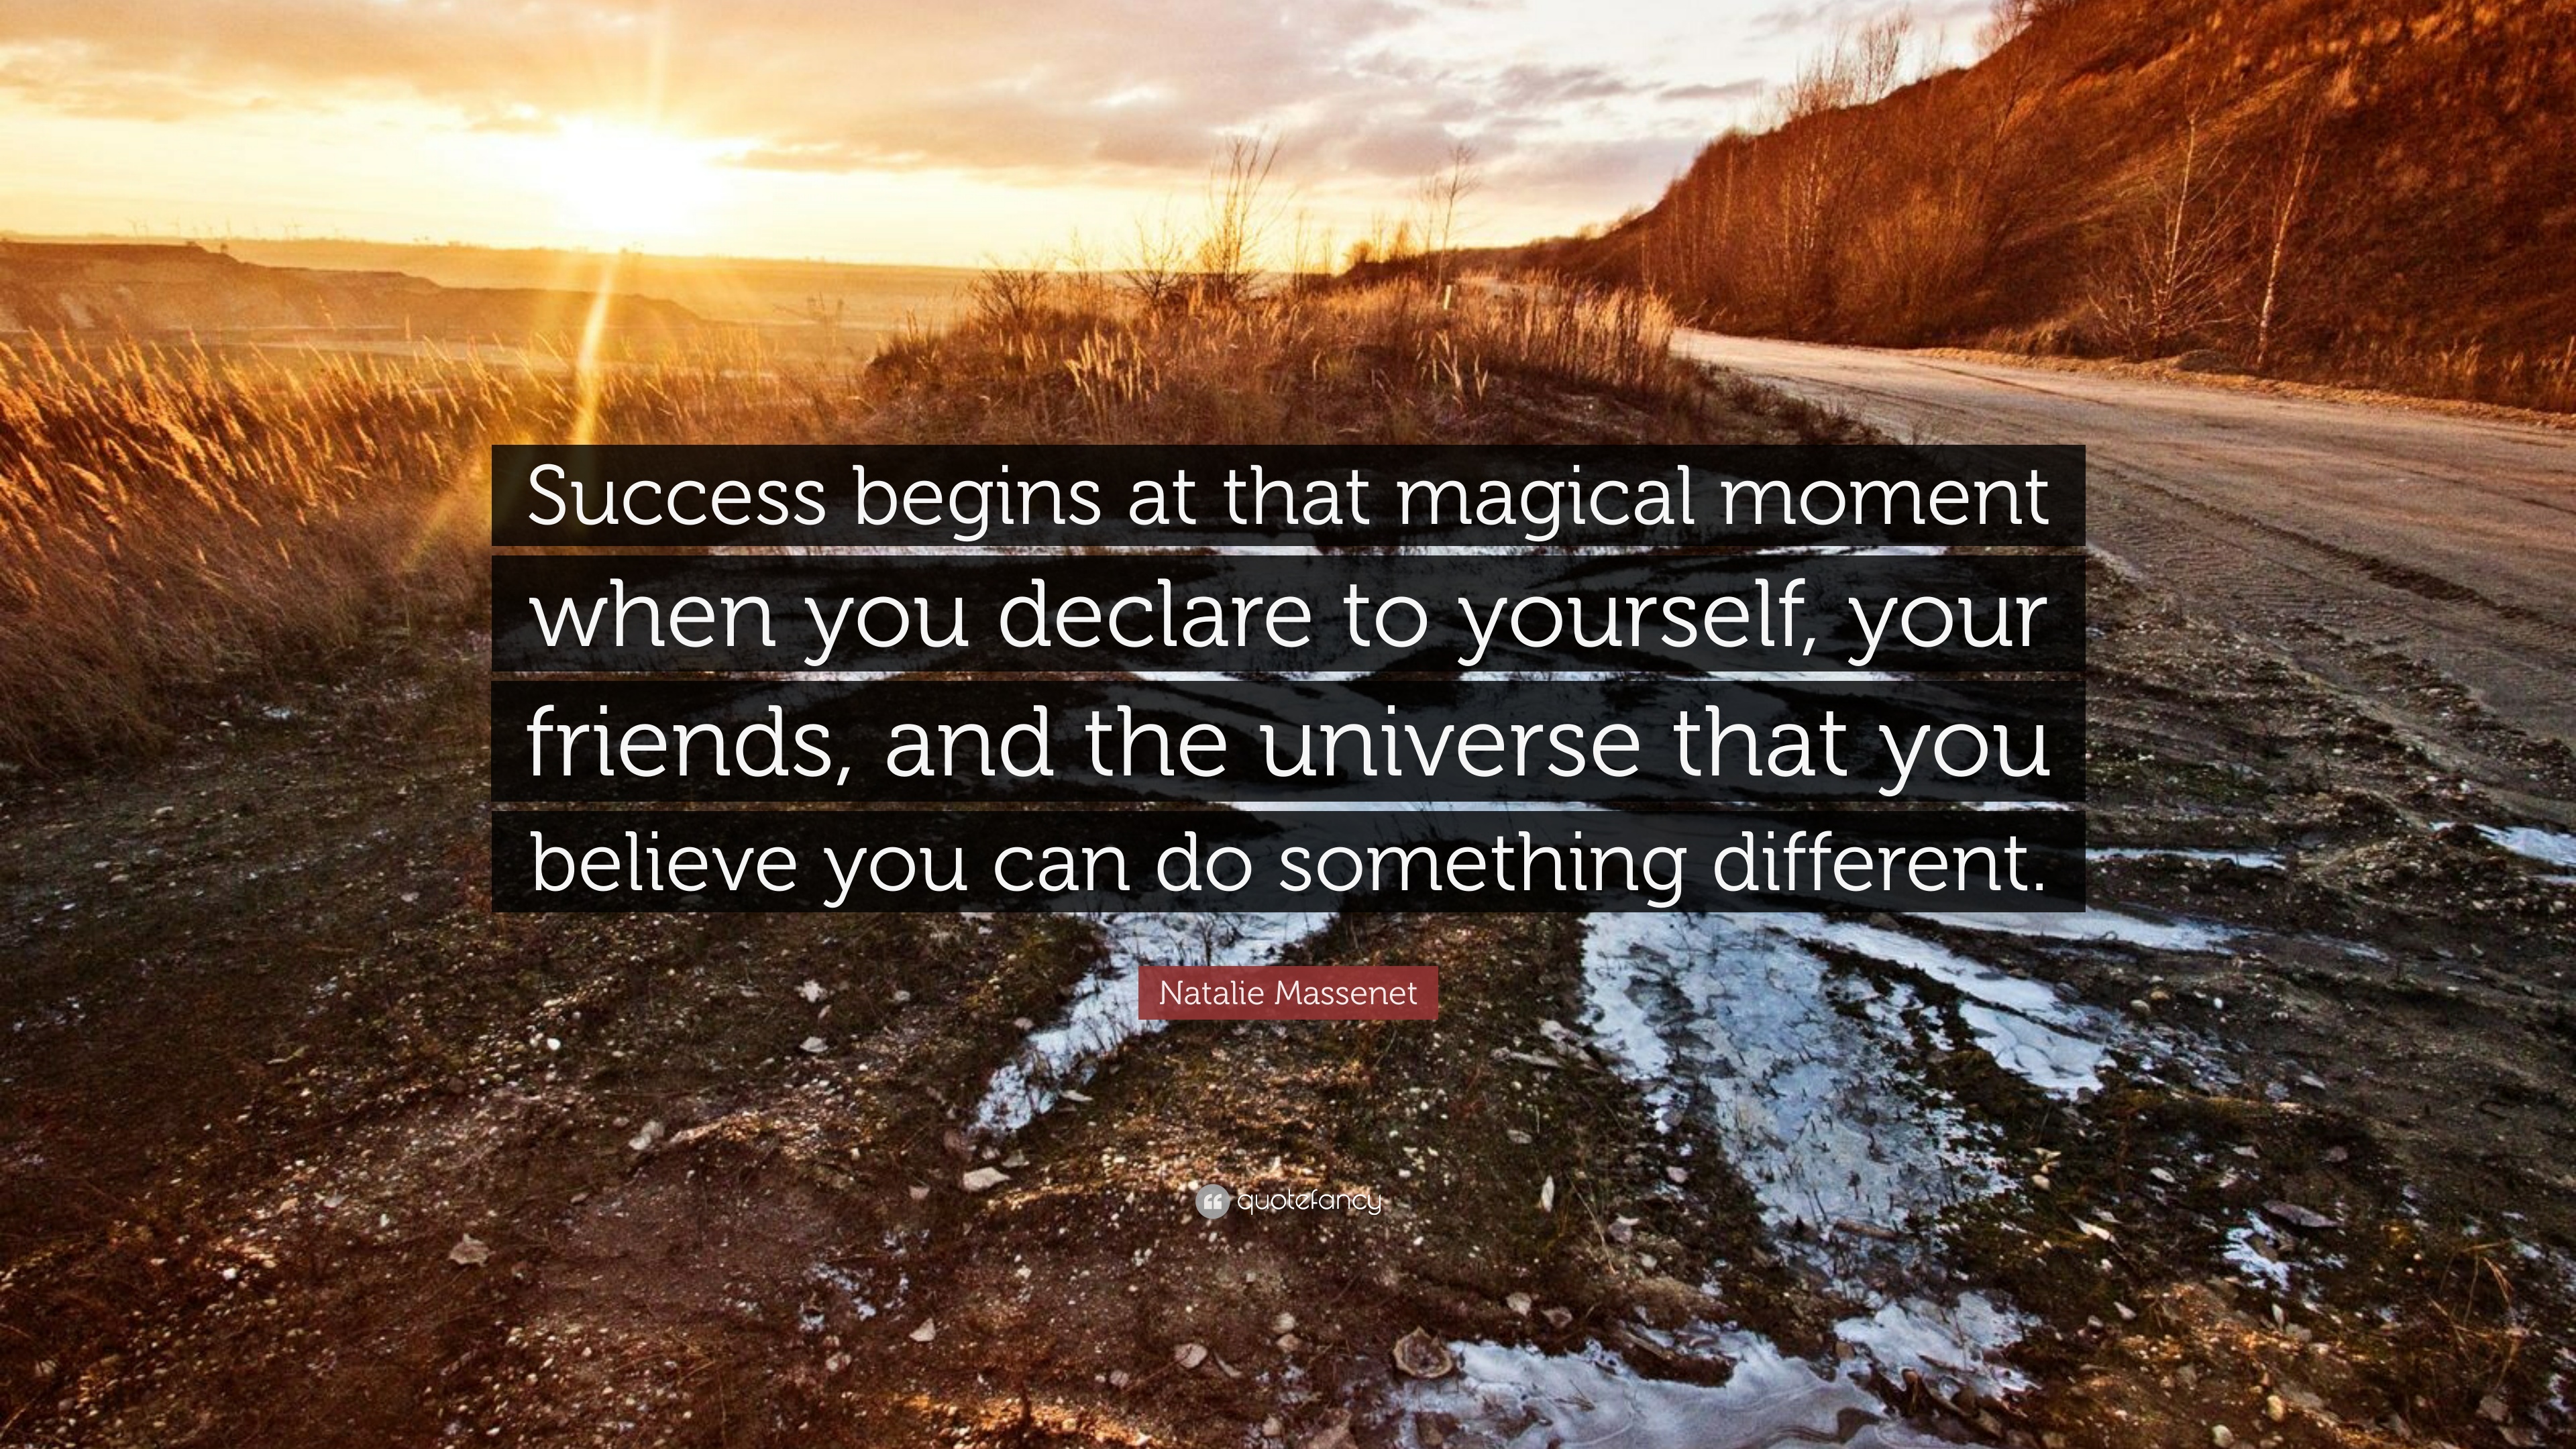 Natalie Massenet Quote: “Success begins at that magical moment when ...